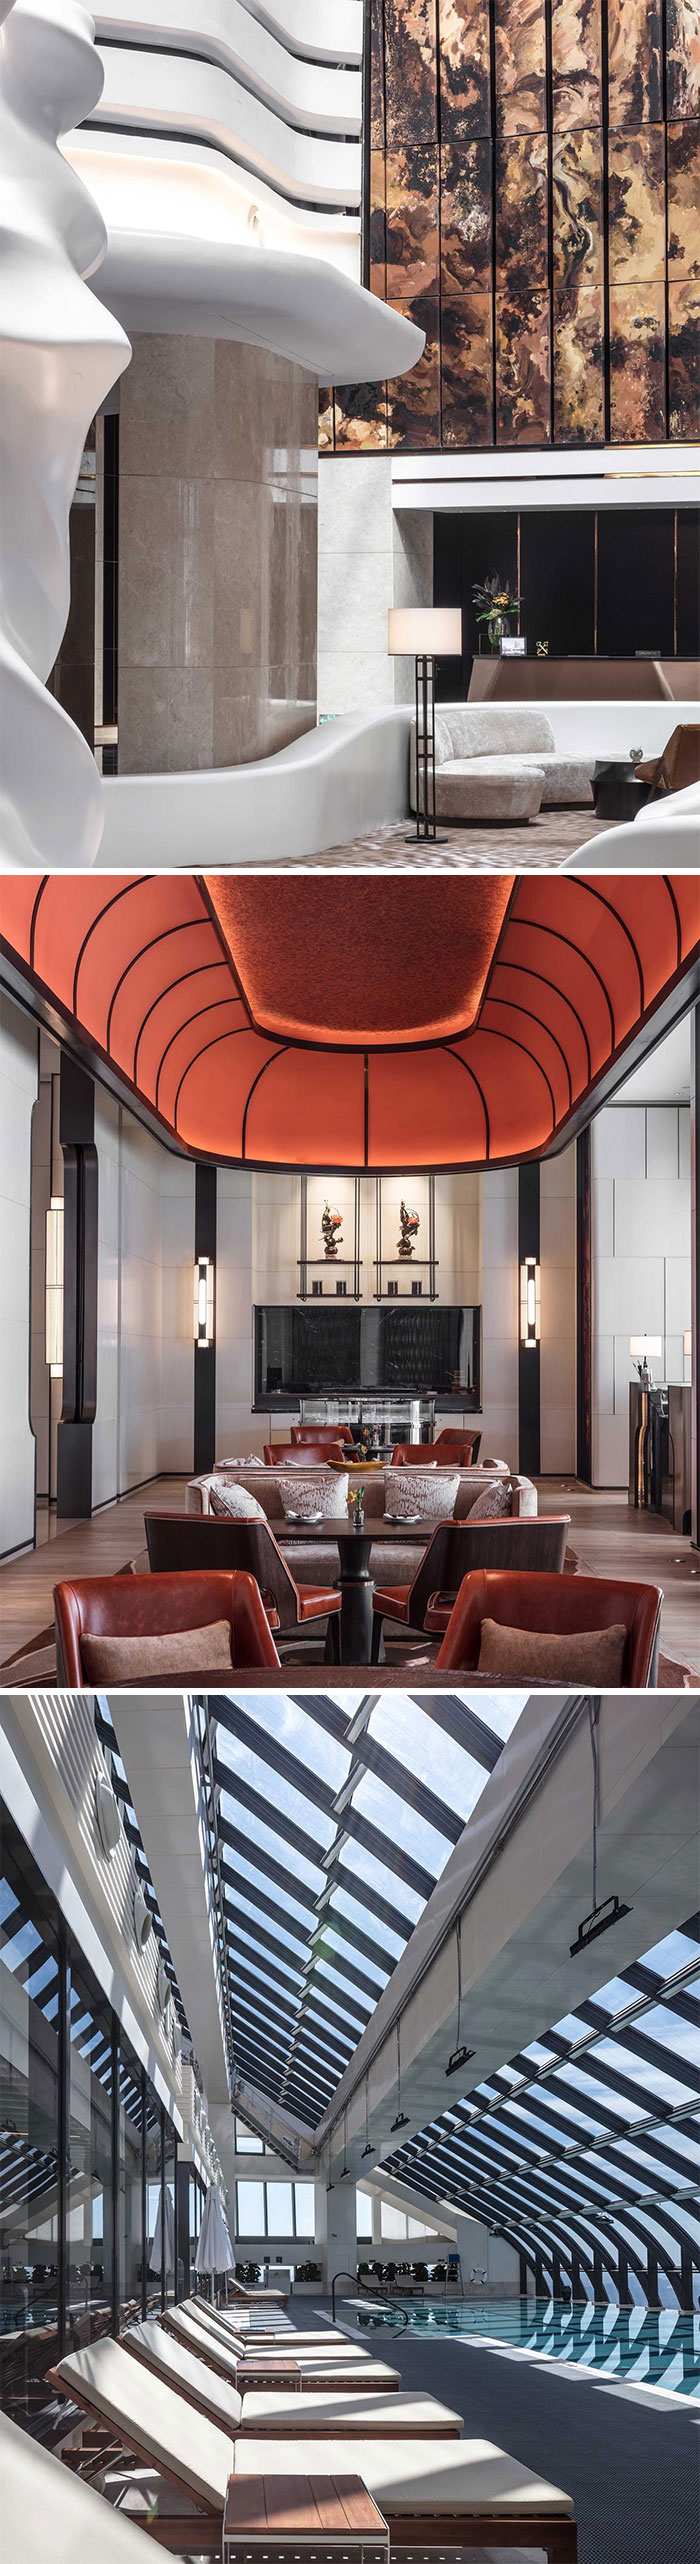 Spring Touches Marble In Jumeirah Nanjing Hotel – Interior: Ltw Designworks, Architect: Zaha Hadid